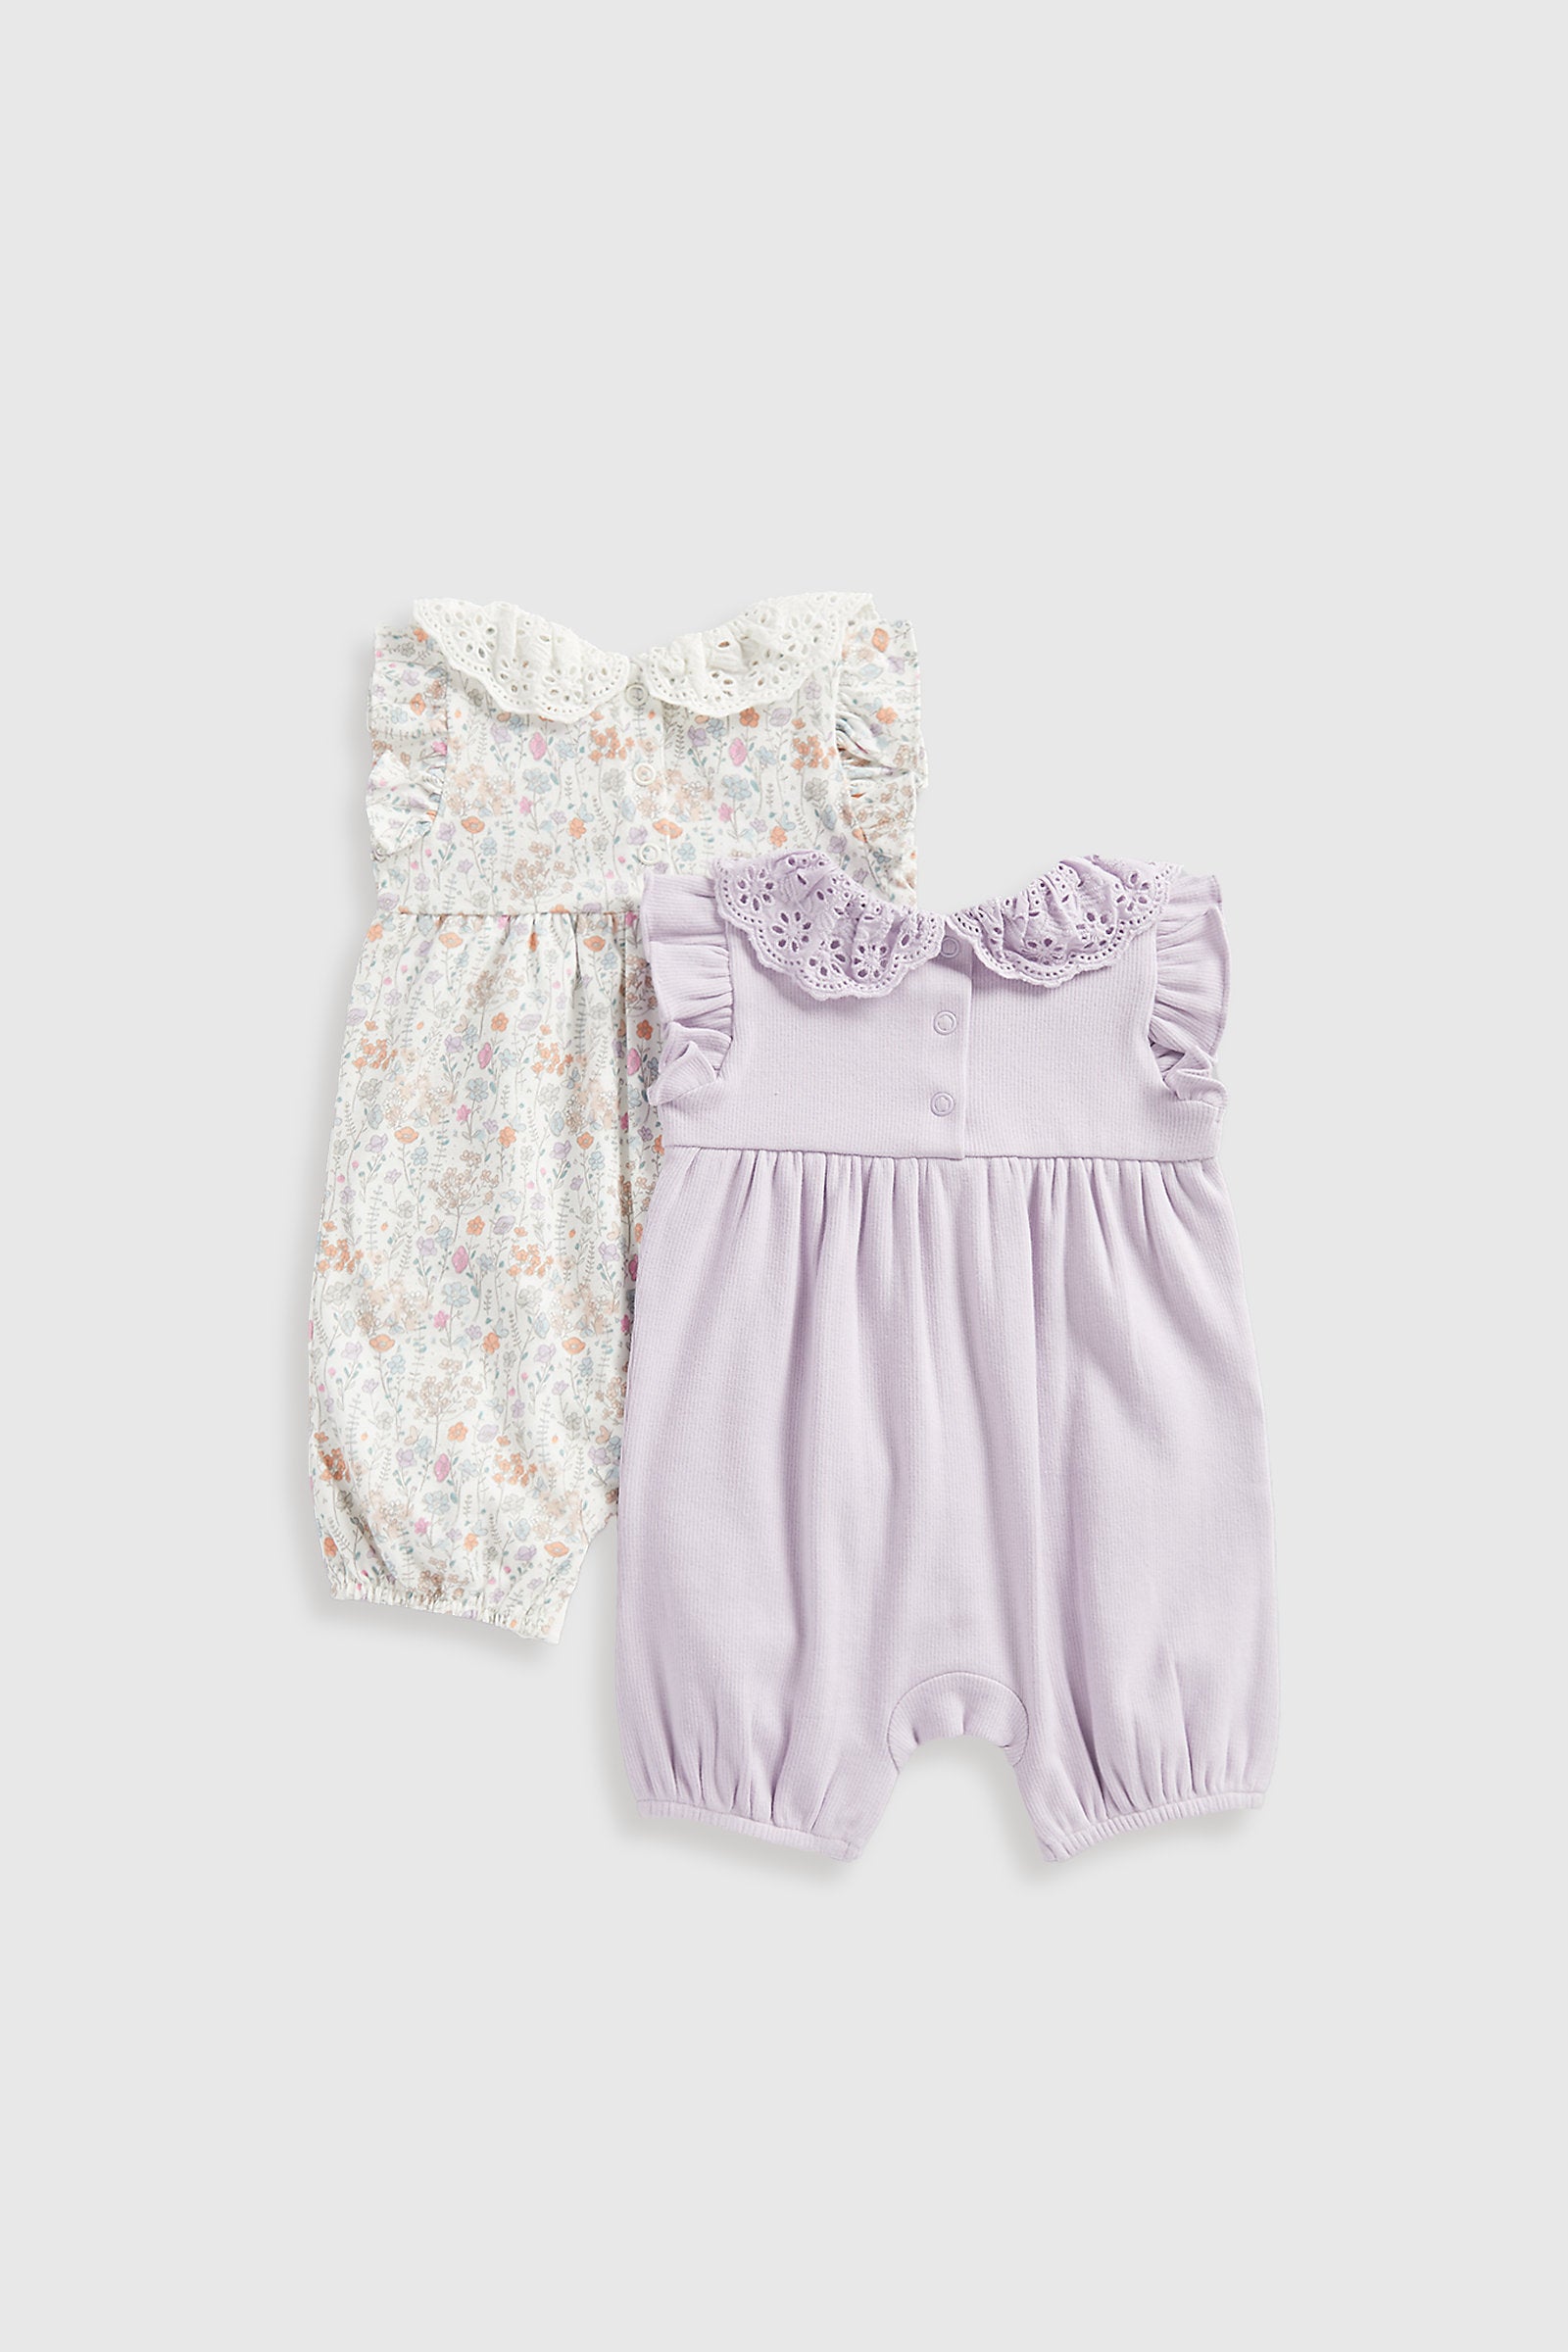 Mothercare Floral Rompers - 2 Pack